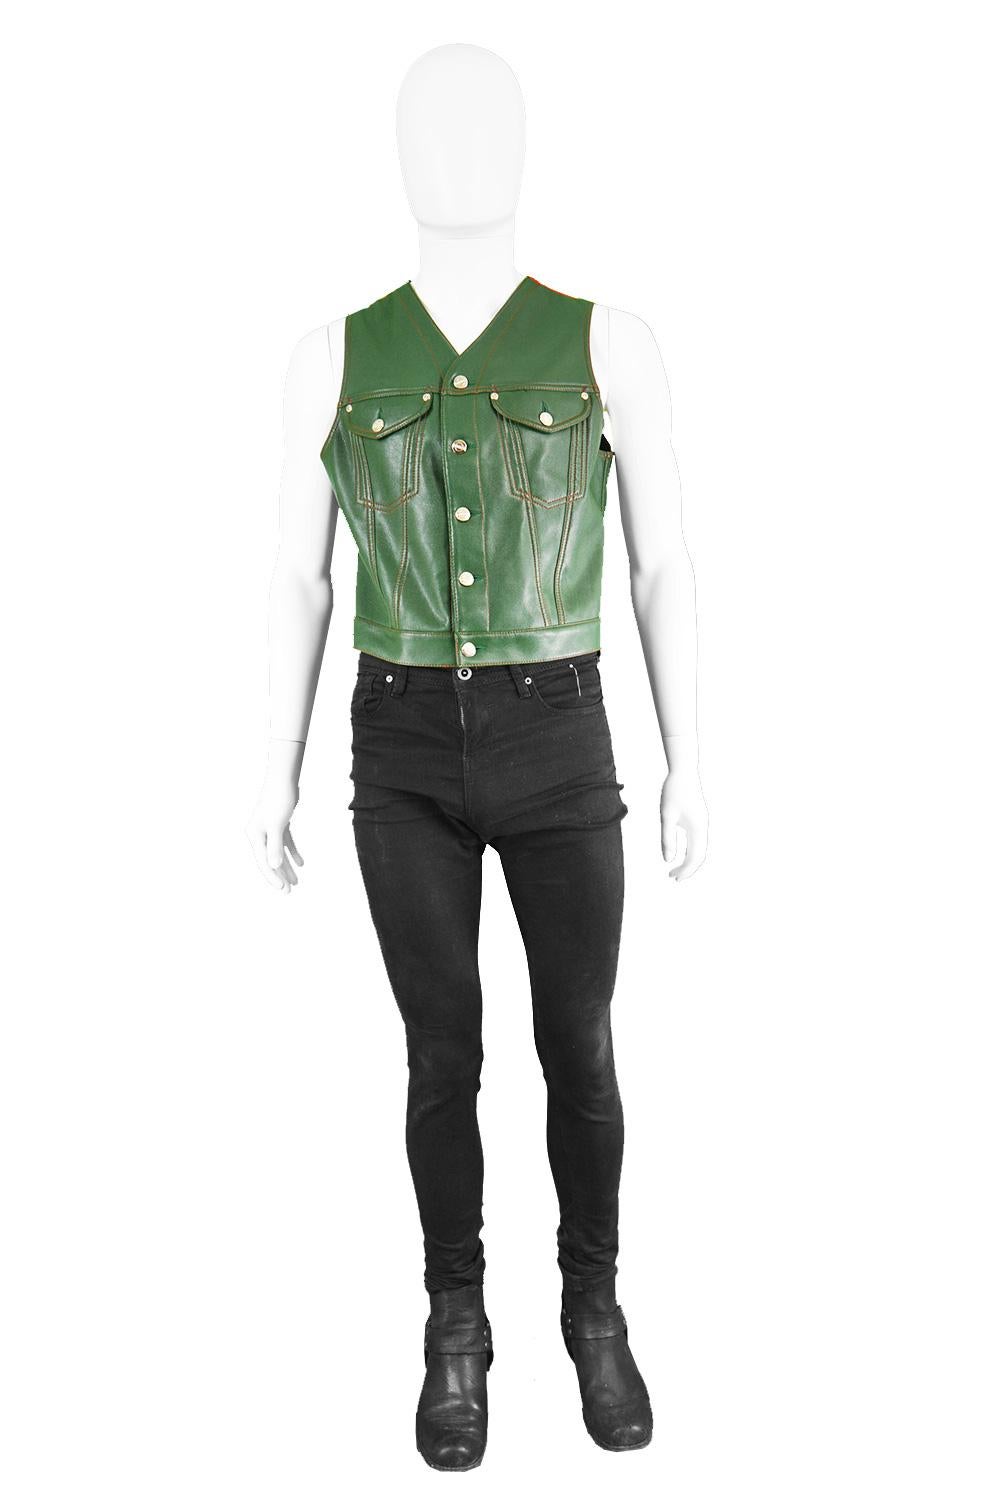 Jean Paul Gaultier Men's Green Faux Leather Gilet Vest with Red Taffeta Back, 1980s

Size: Marked 50 which is roughly a men's Small to Medium. Please check measurements.
Chest - 40” / 101cm
Waist - 34” /  86cm
Length (Shoulder to Hem) - 20” /